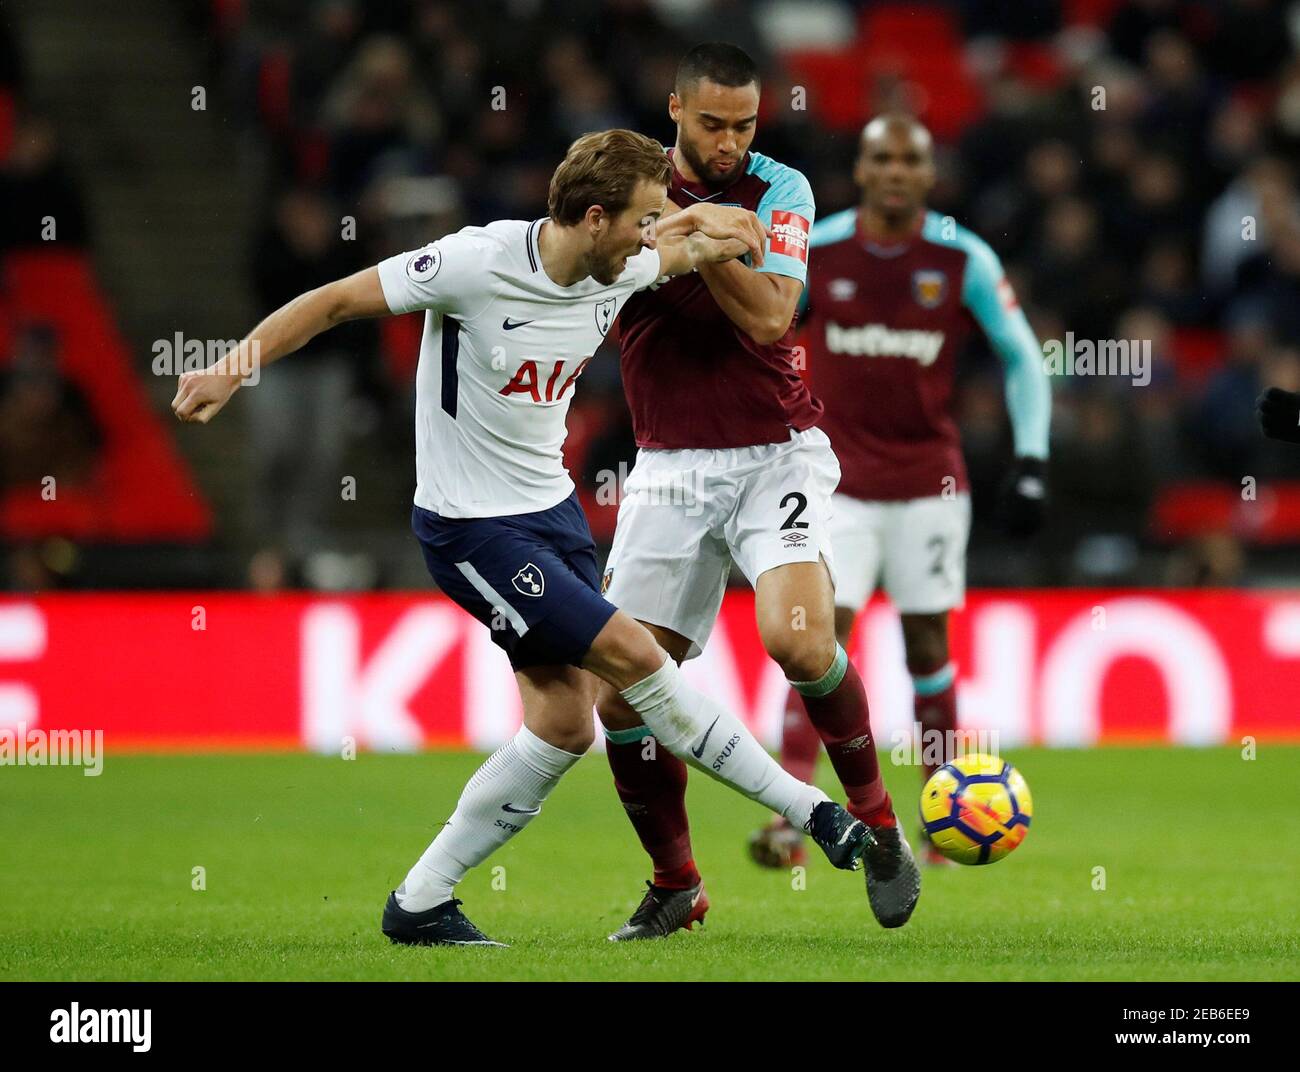 Soccer Football - Premier League - Tottenham Hotspur vs West Ham United - Wembley Stadium, London, Britain - January 4, 2018   Tottenham's Harry Kane in action with West Ham United's Winston Reid    REUTERS/Eddie Keogh    EDITORIAL USE ONLY. No use with unauthorized audio, video, data, fixture lists, club/league logos or 'live' services. Online in-match use limited to 75 images, no video emulation. No use in betting, games or single club/league/player publications.  Please contact your account representative for further details. Stock Photo